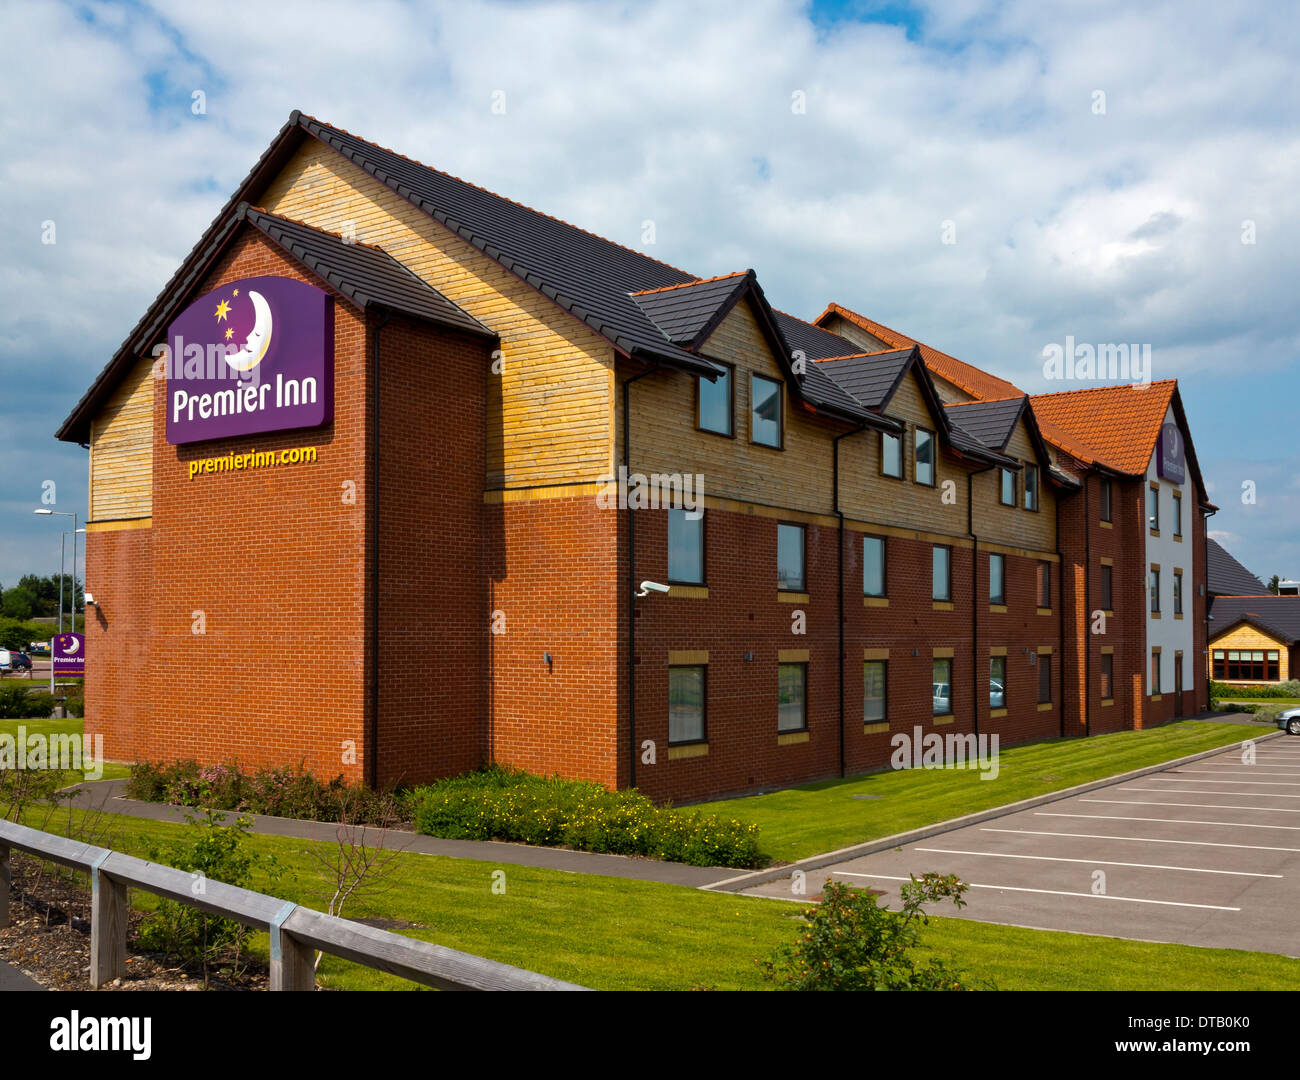 Premier Inn in Rugeley Staffordshire England UK part of a chain of British budget hotels owned by Whitbread Stock Photo